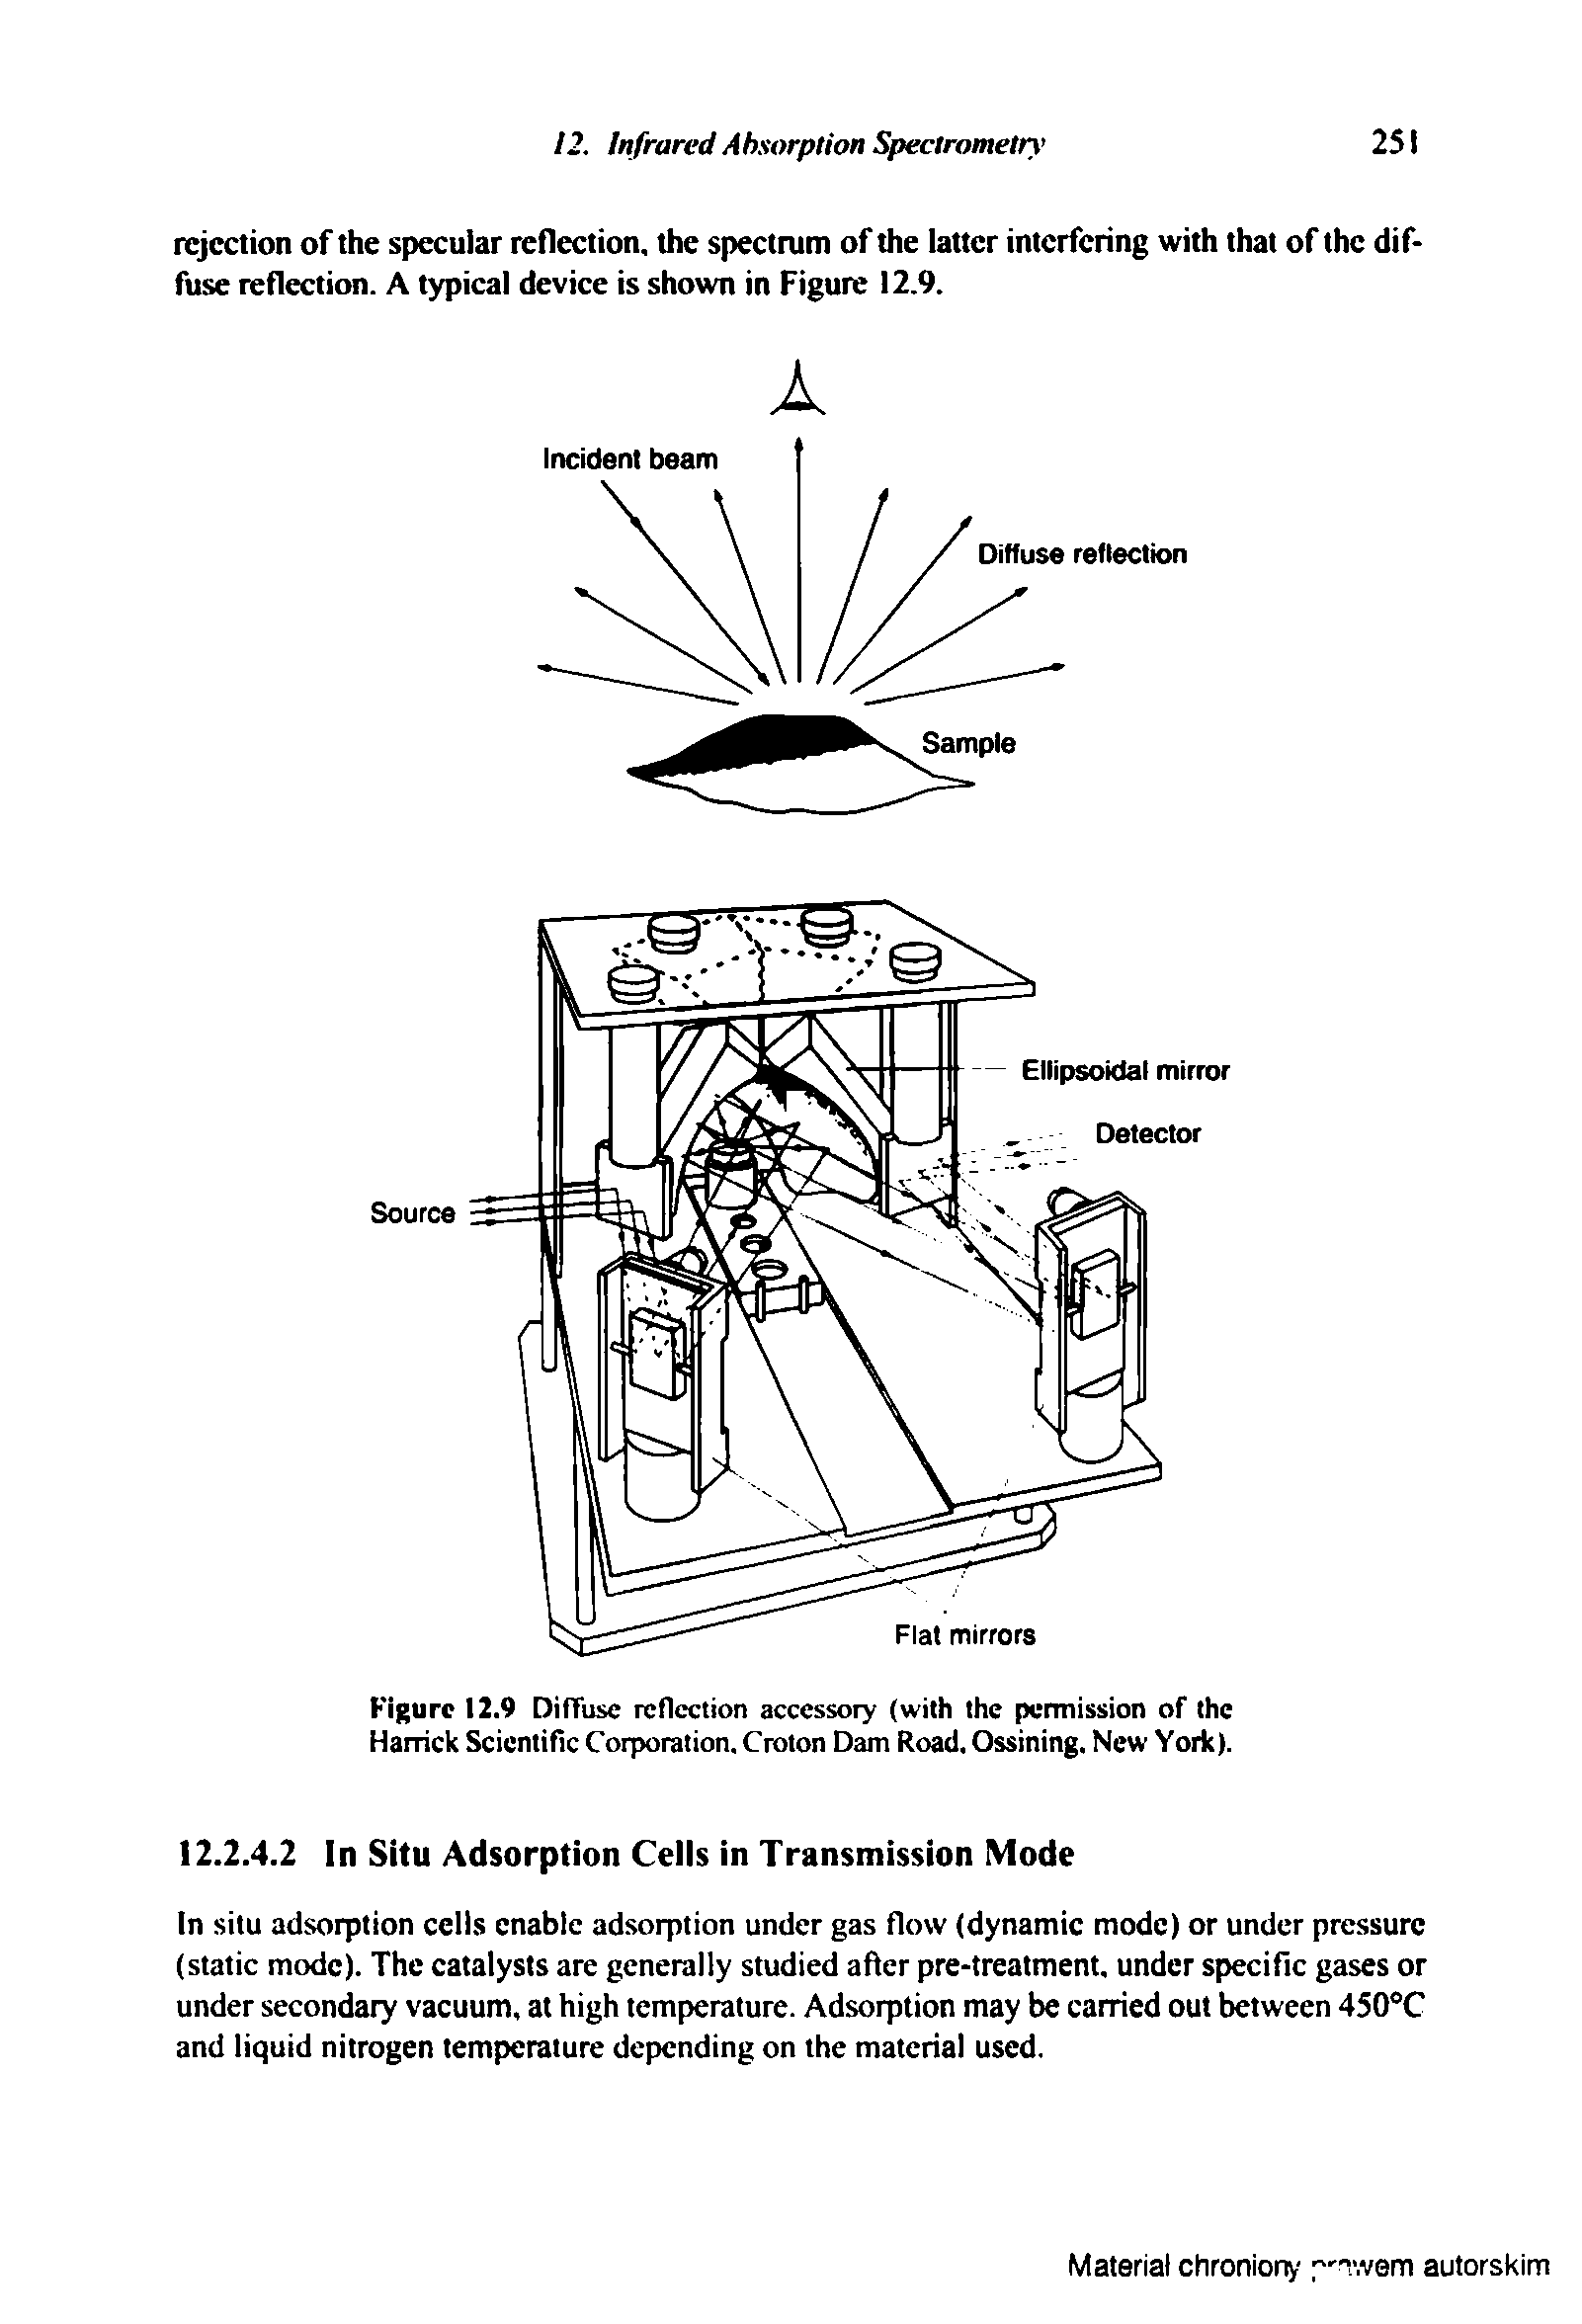 Figure 12.9 Diffuse reflection accessory (with the permission of the Harhck Scientific Corporation. Croton Dam Road. Ossining. New York).